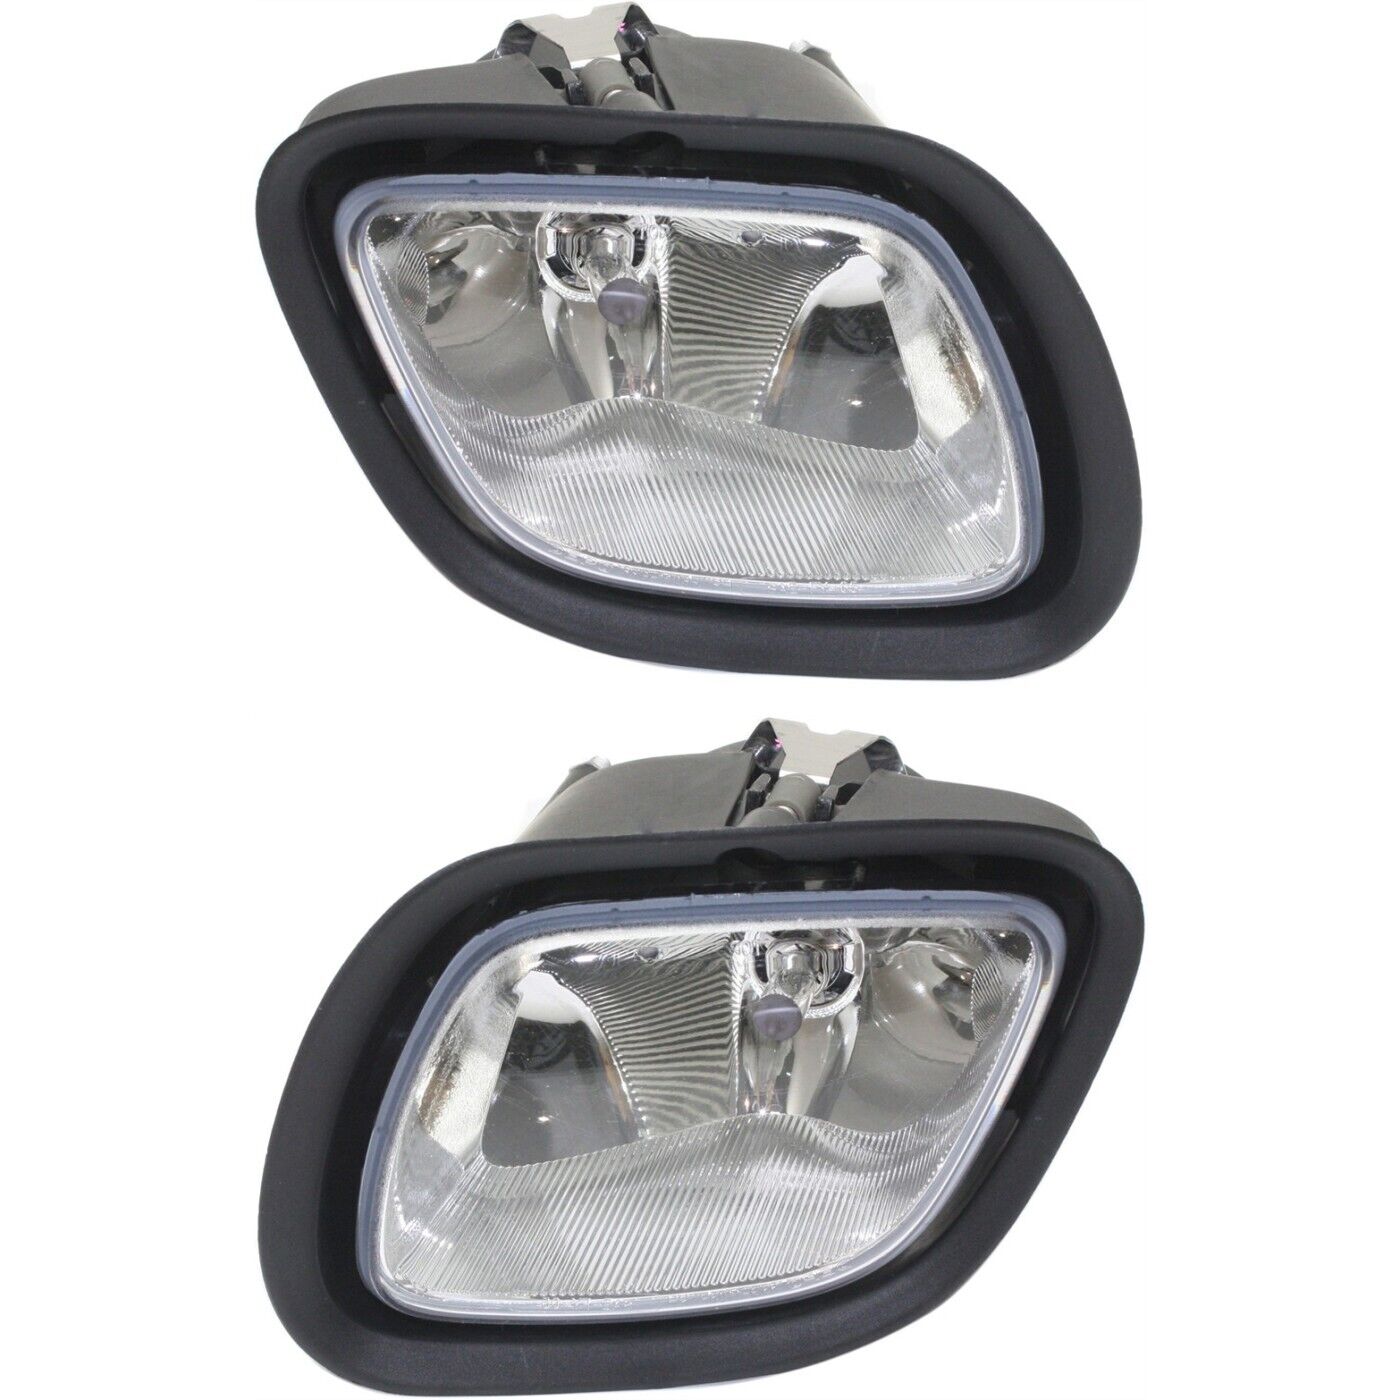 Fog Light Set For 2008-2017 Freightliner Cascadia Left and Right Side With Bulbs